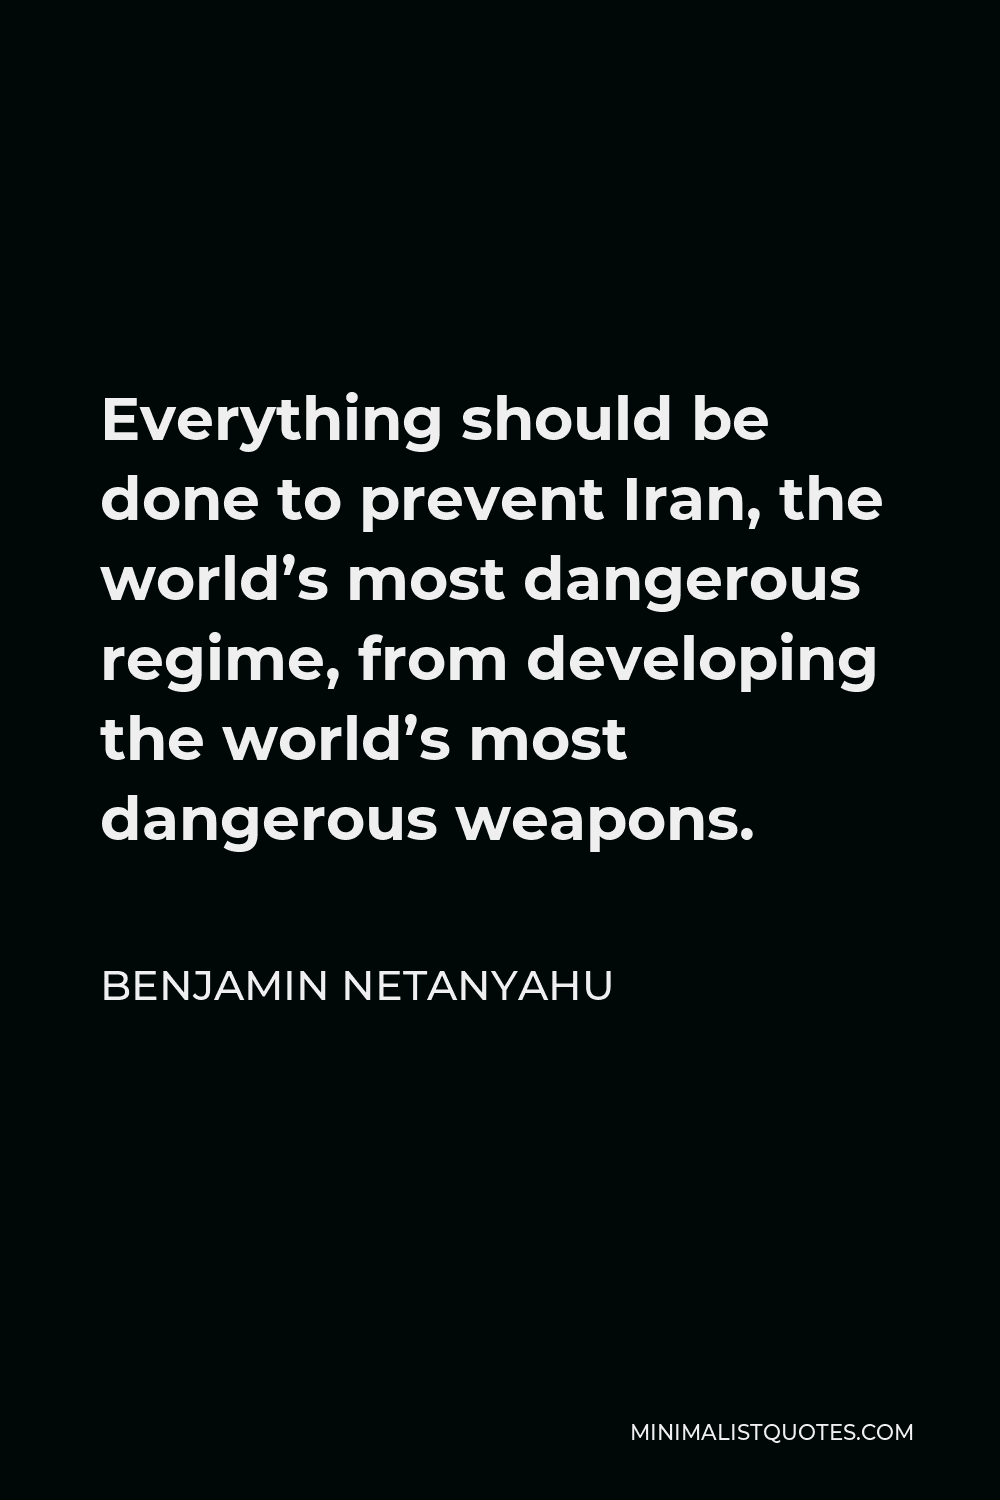 Benjamin Netanyahu Quote - Everything should be done to prevent Iran, the world’s most dangerous regime, from developing the world’s most dangerous weapons.